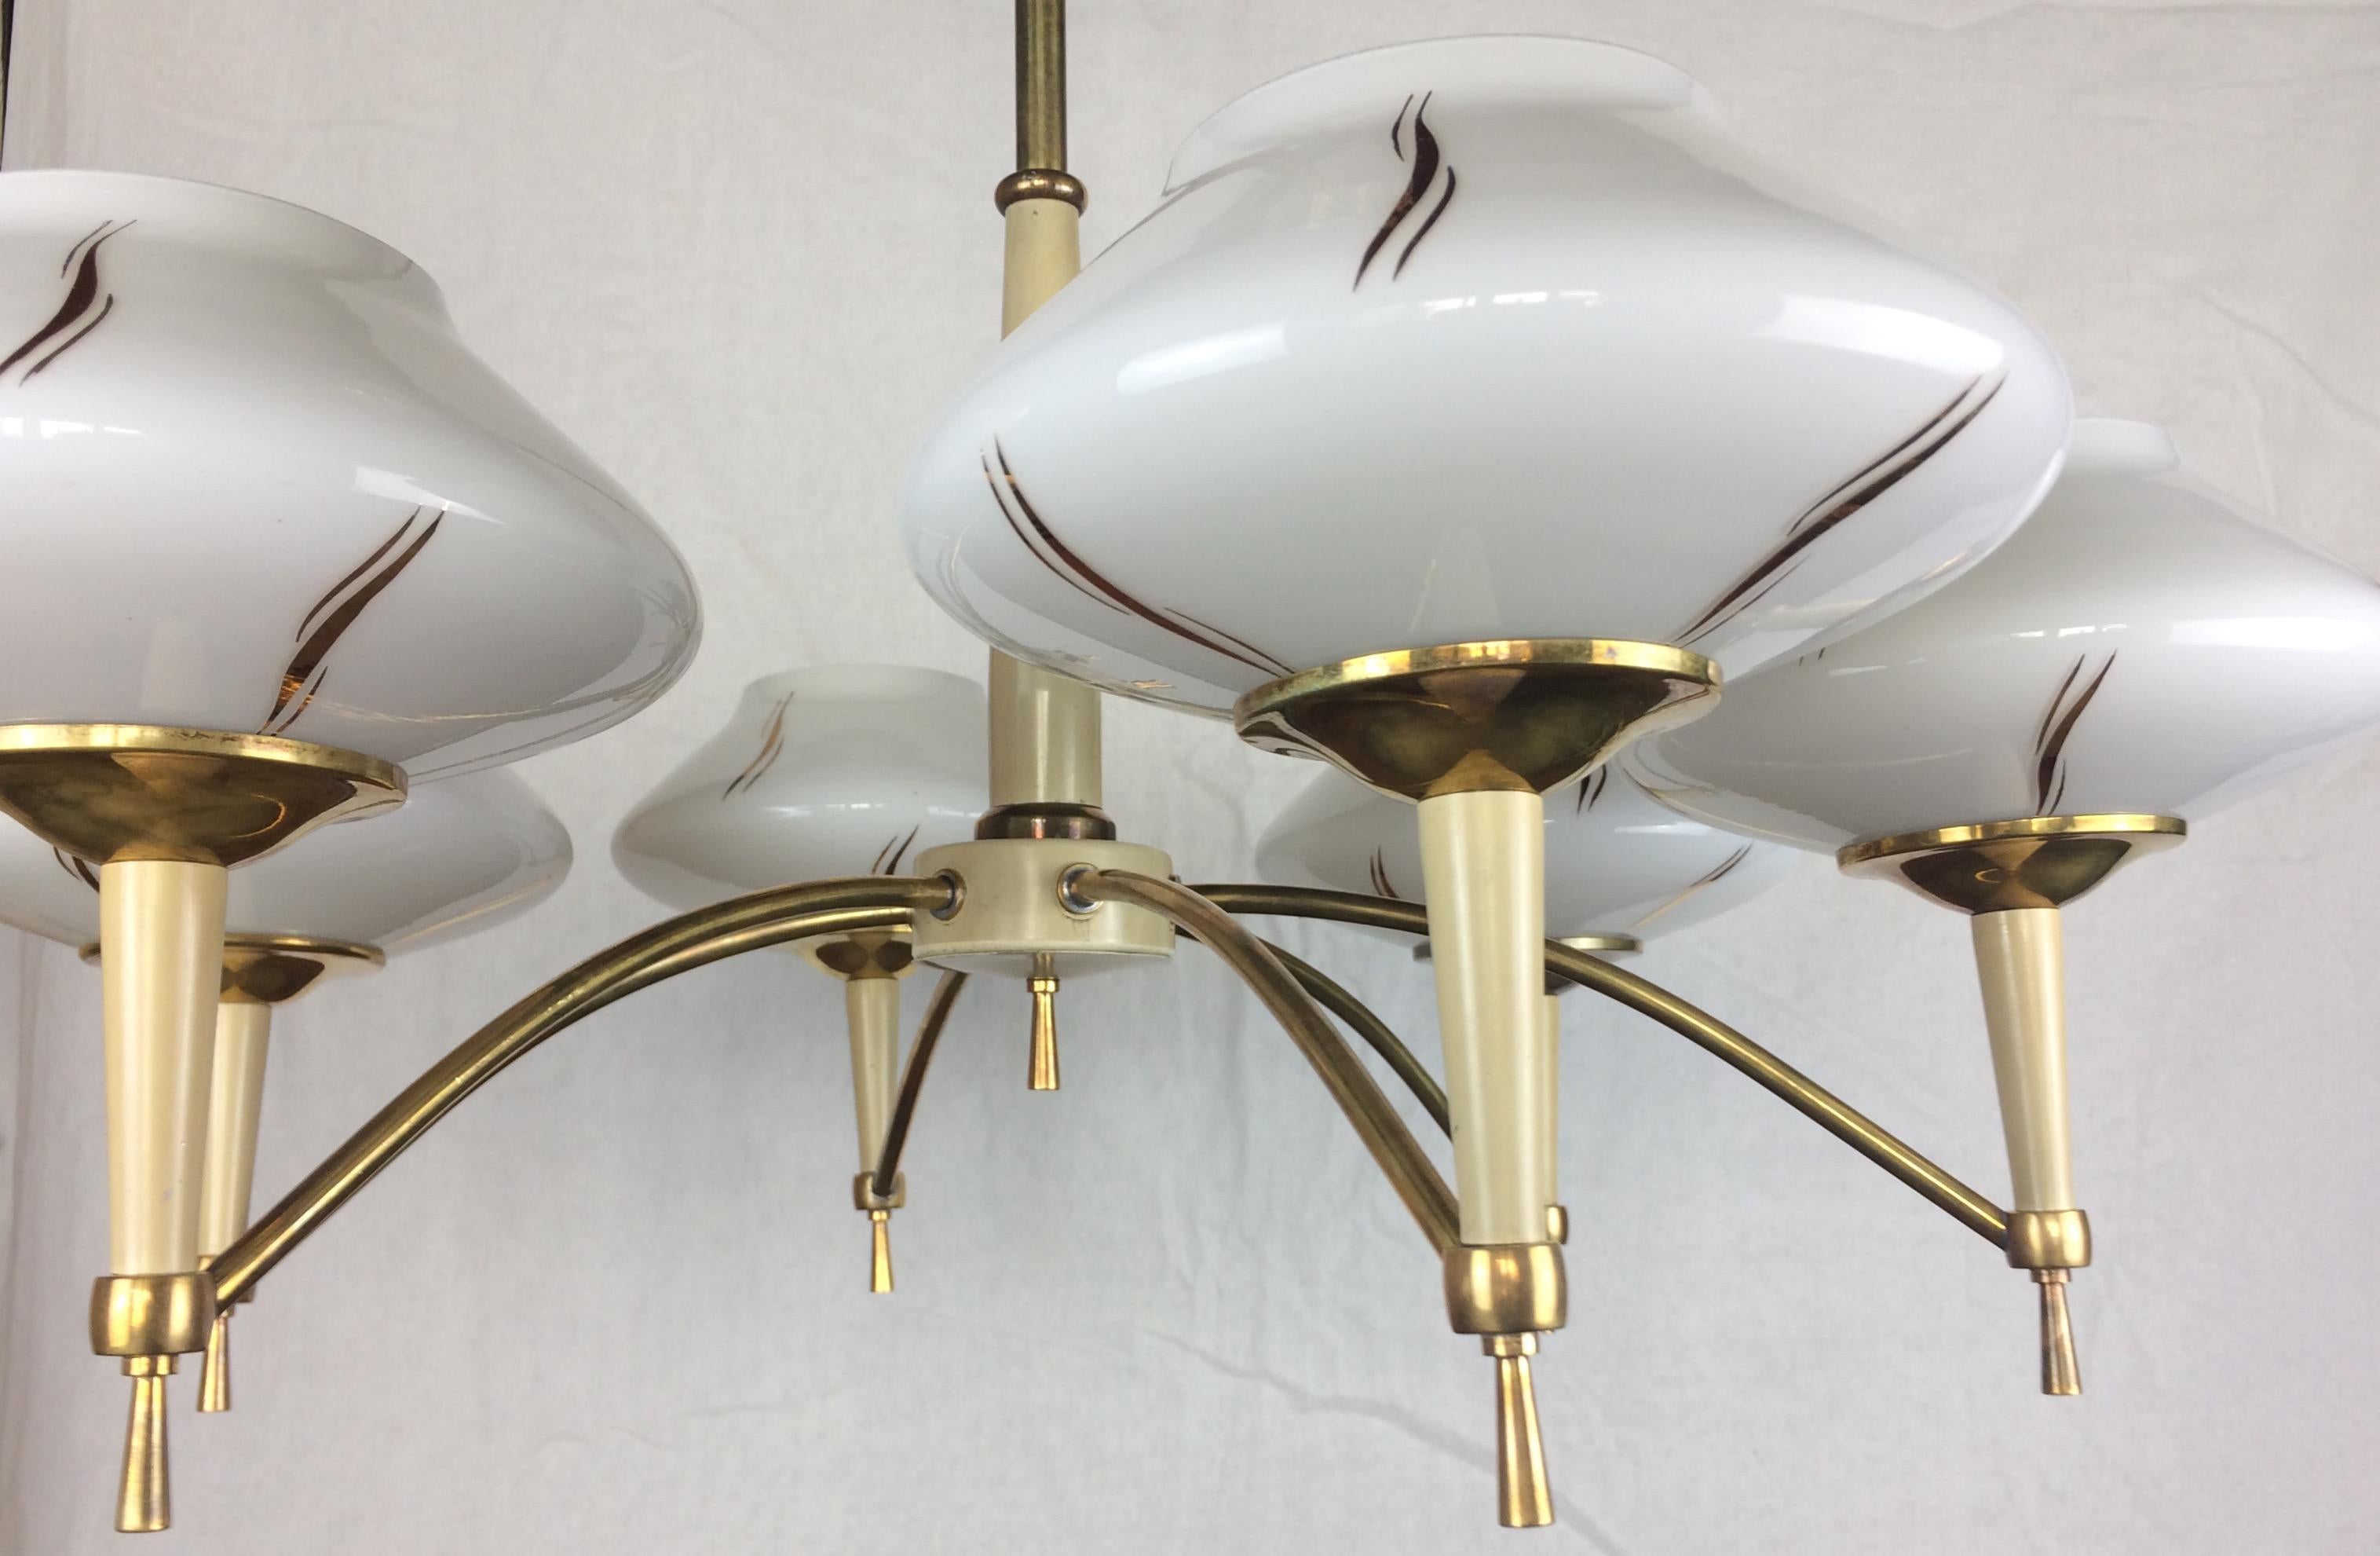 Original Maison Arlus designed chandelier produced in France, circa 1950s.
The peculiarity that distinguishes this chandelier is its innovative form of that period, mounted on a single brass axis with 6 opaline globes. 

Very good vintage condition.